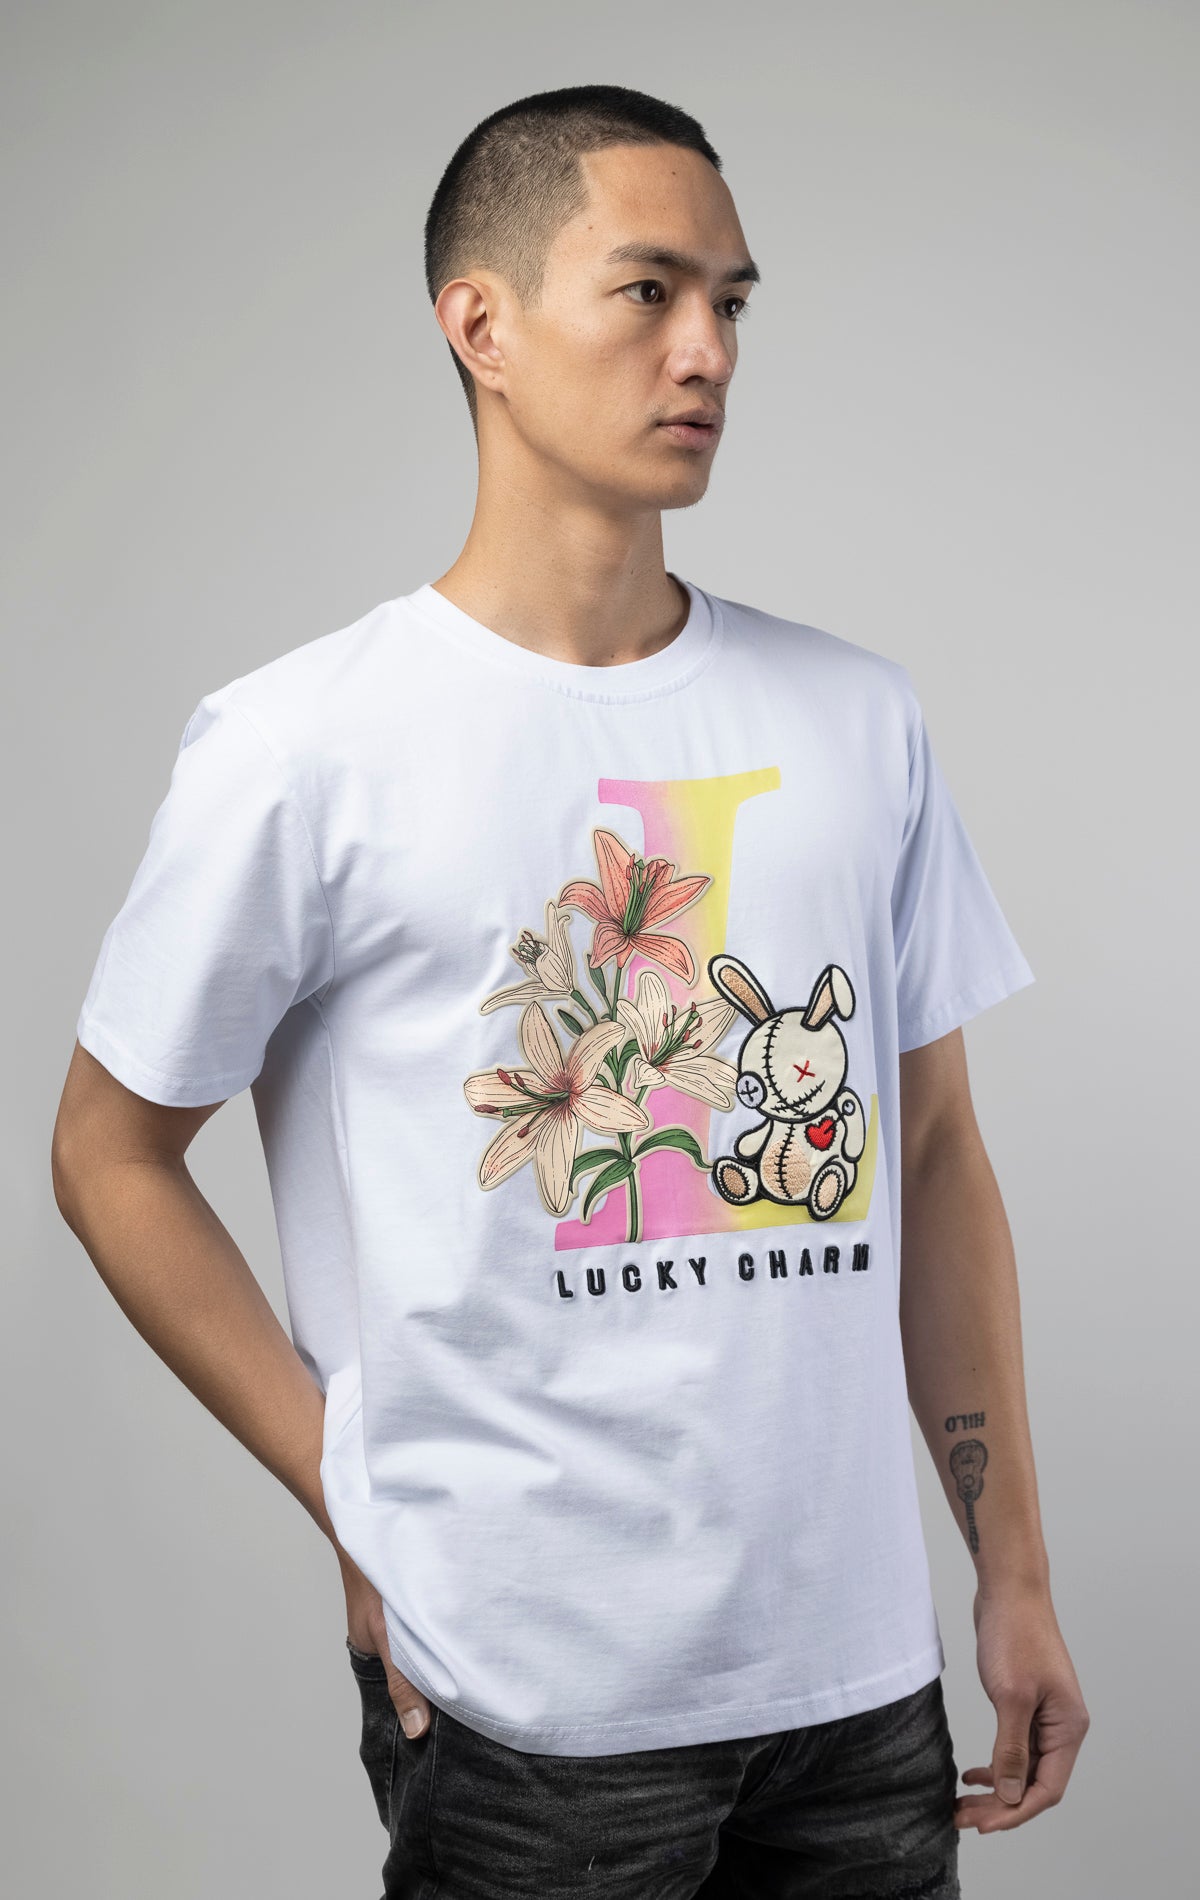 BKYS L lucky charm, t-shirt with bunny graphic on the front